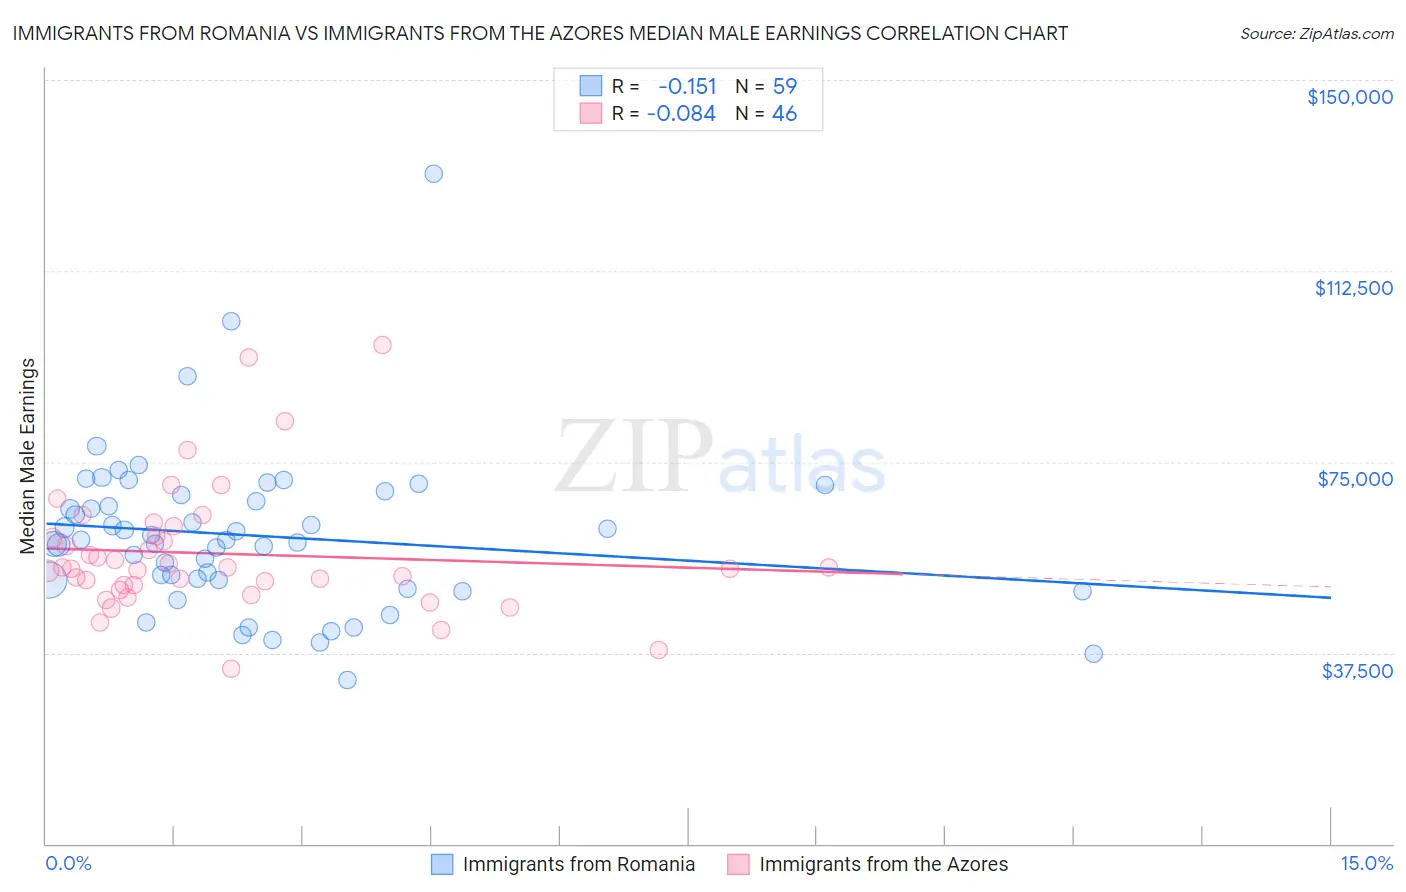 Immigrants from Romania vs Immigrants from the Azores Median Male Earnings